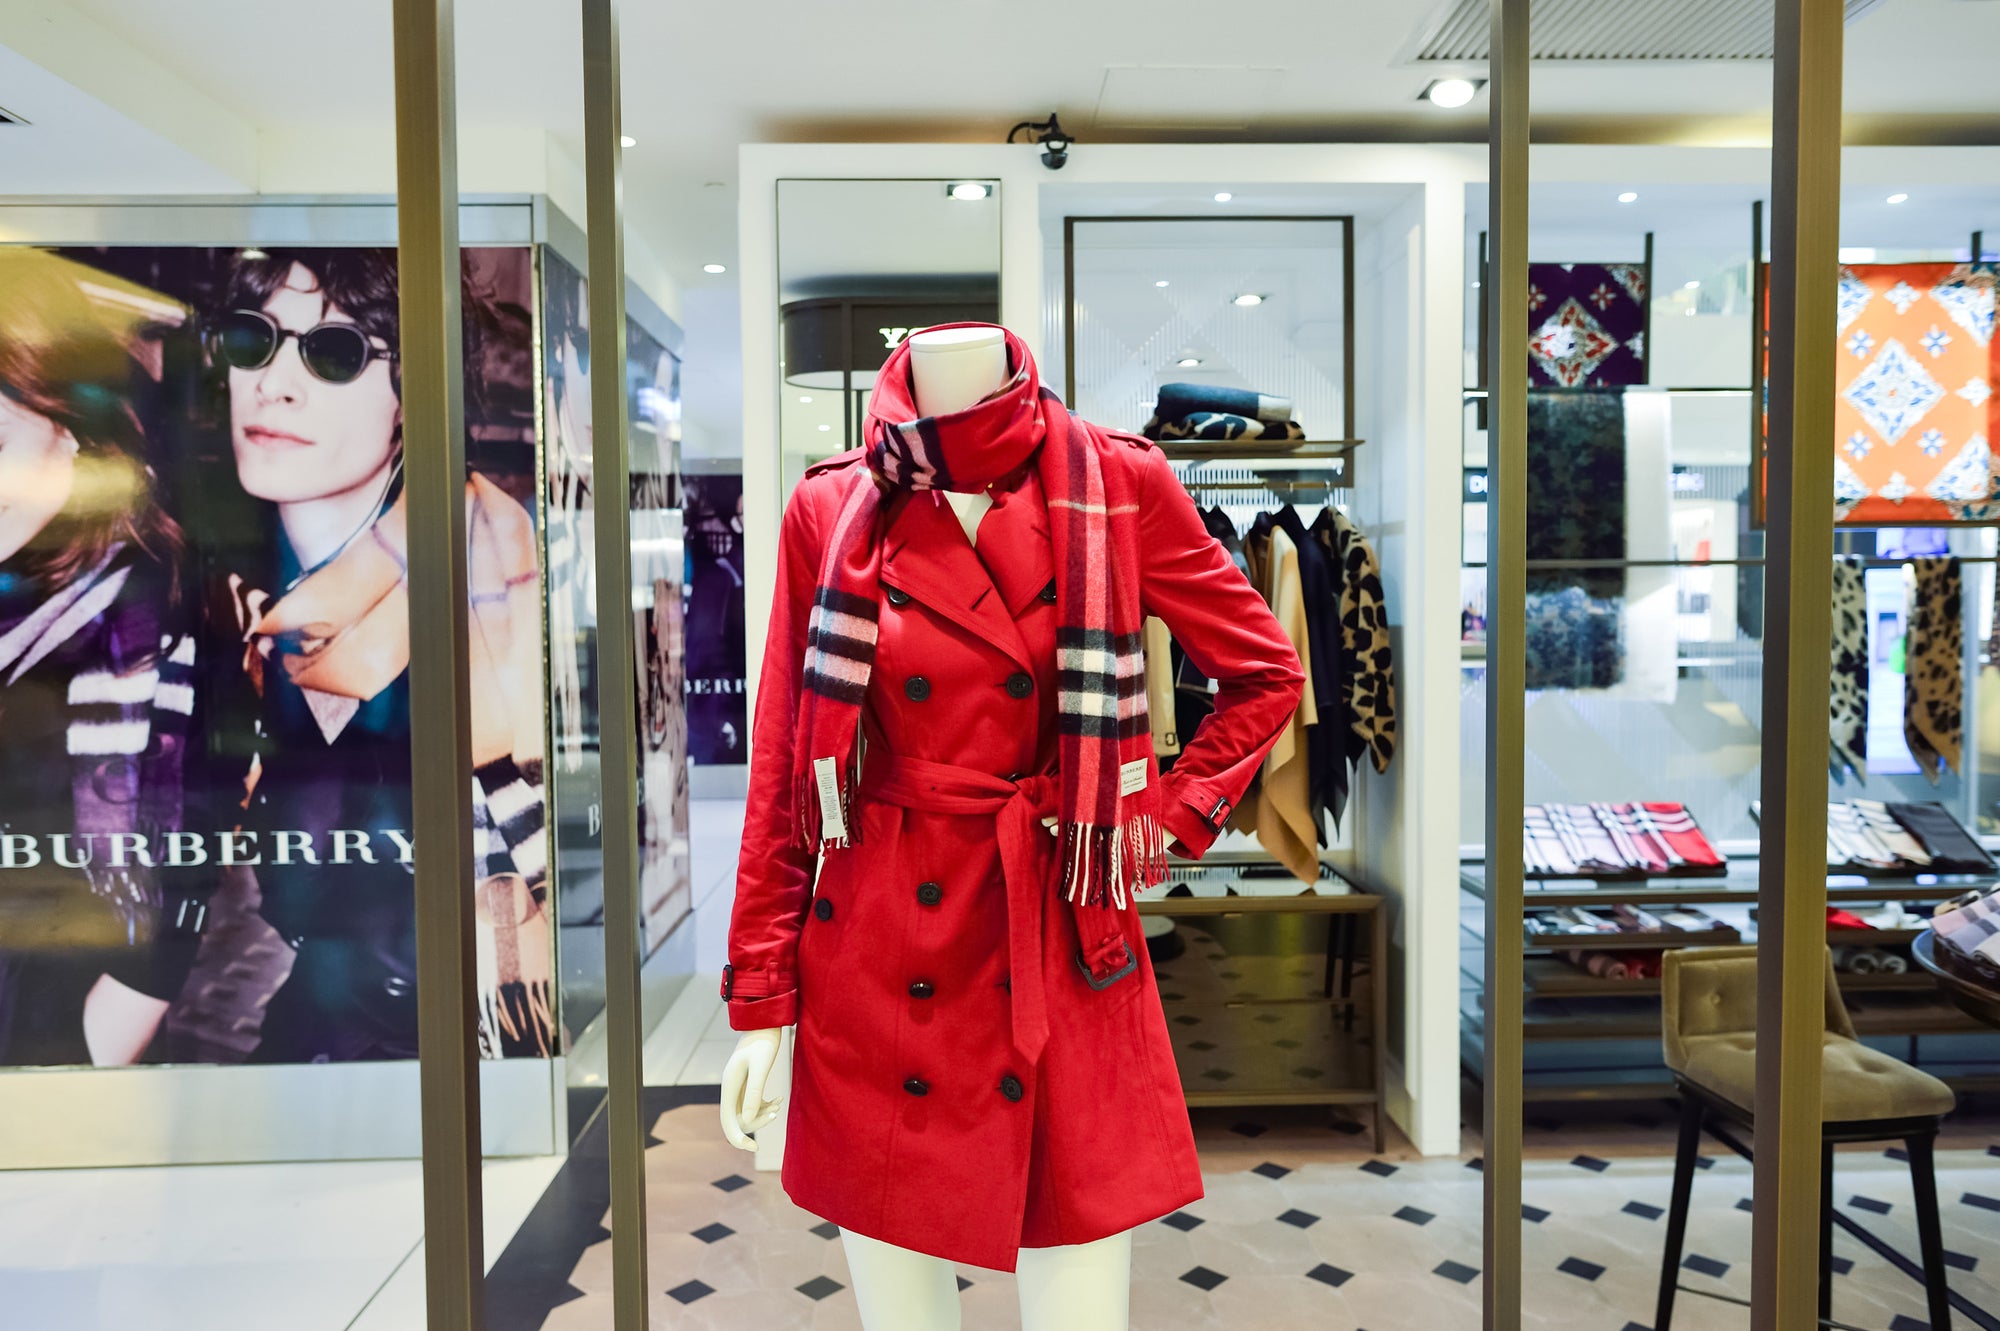 This Gucci G Rhombus print trench coat with cape is everything!